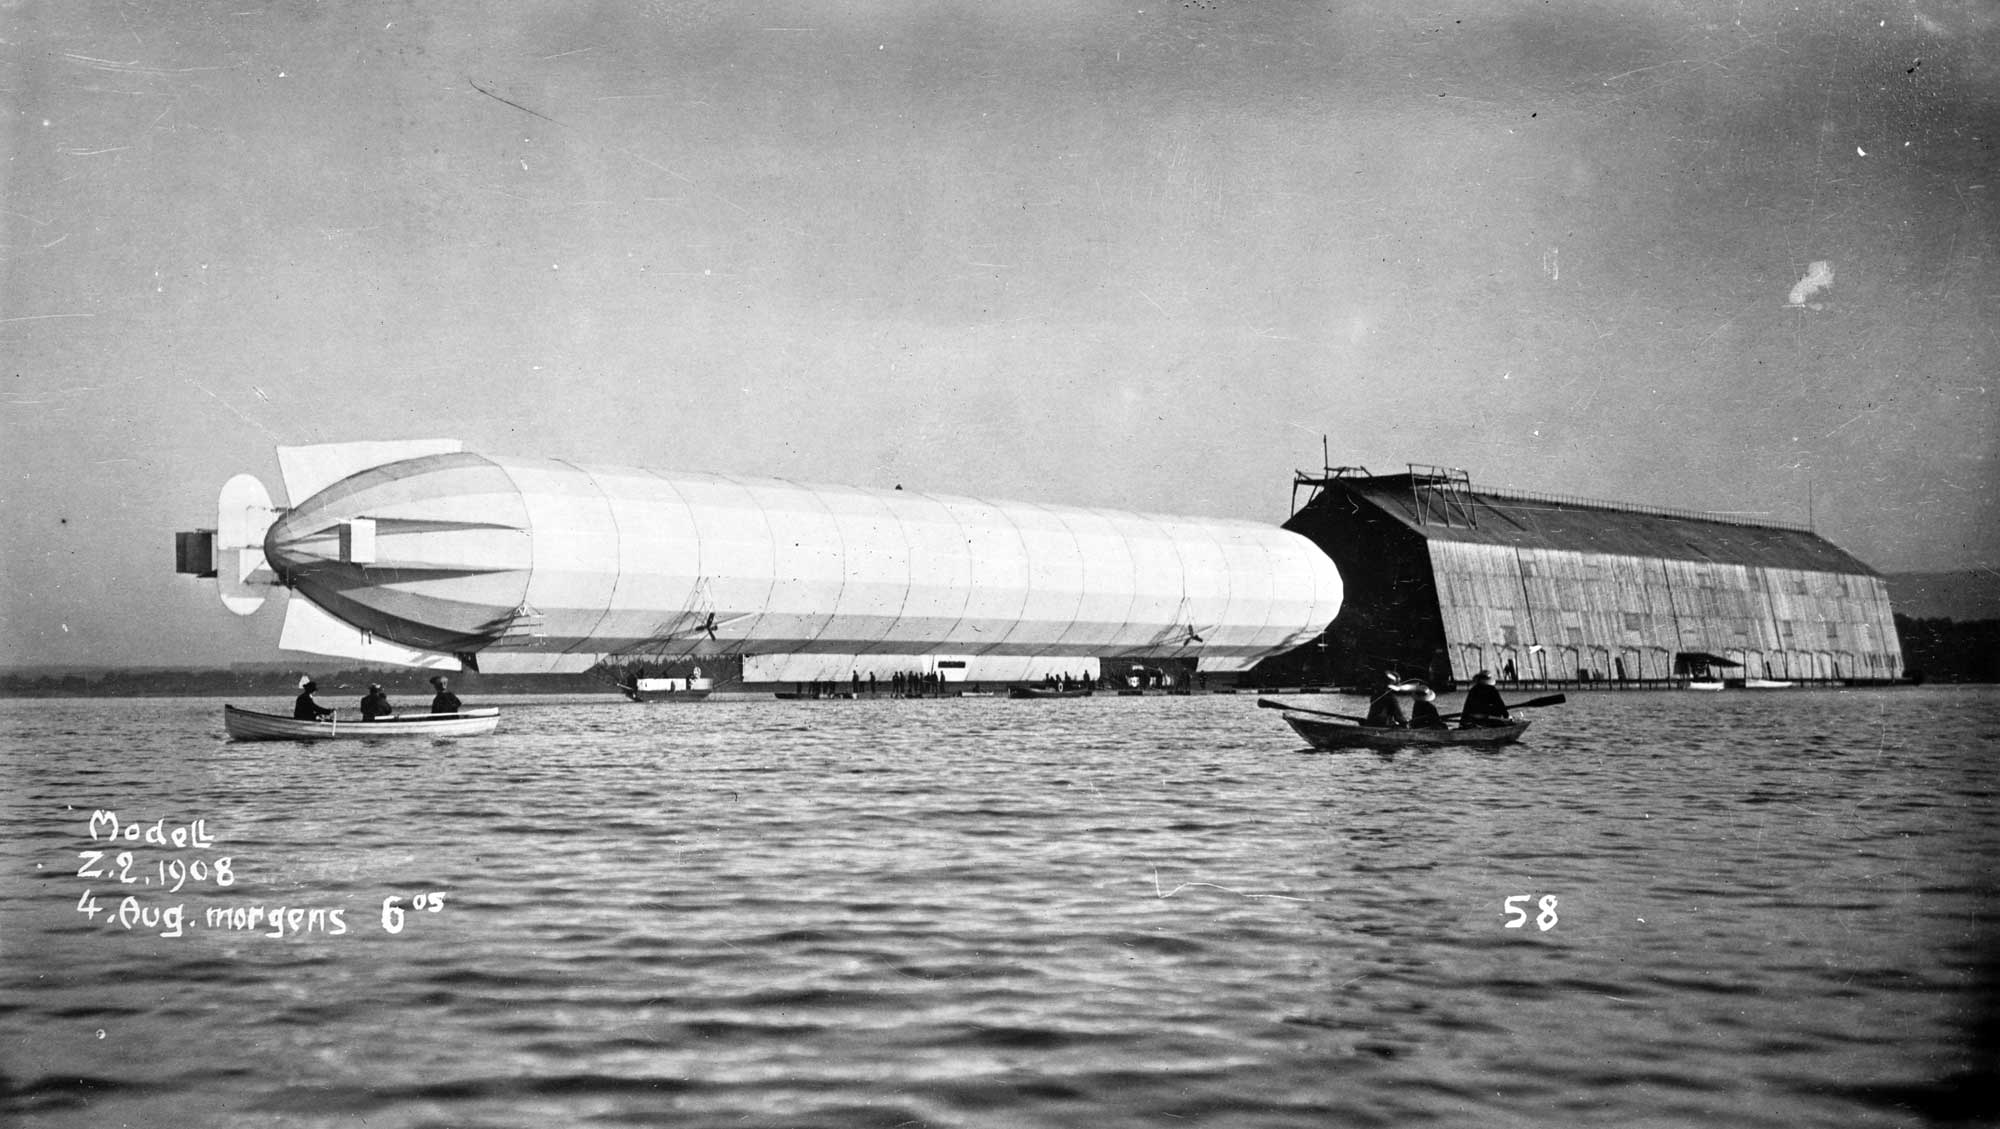 LZ-4 leaves the hangar on Lake Constance, 6:05 a.m., 4 August 1908.